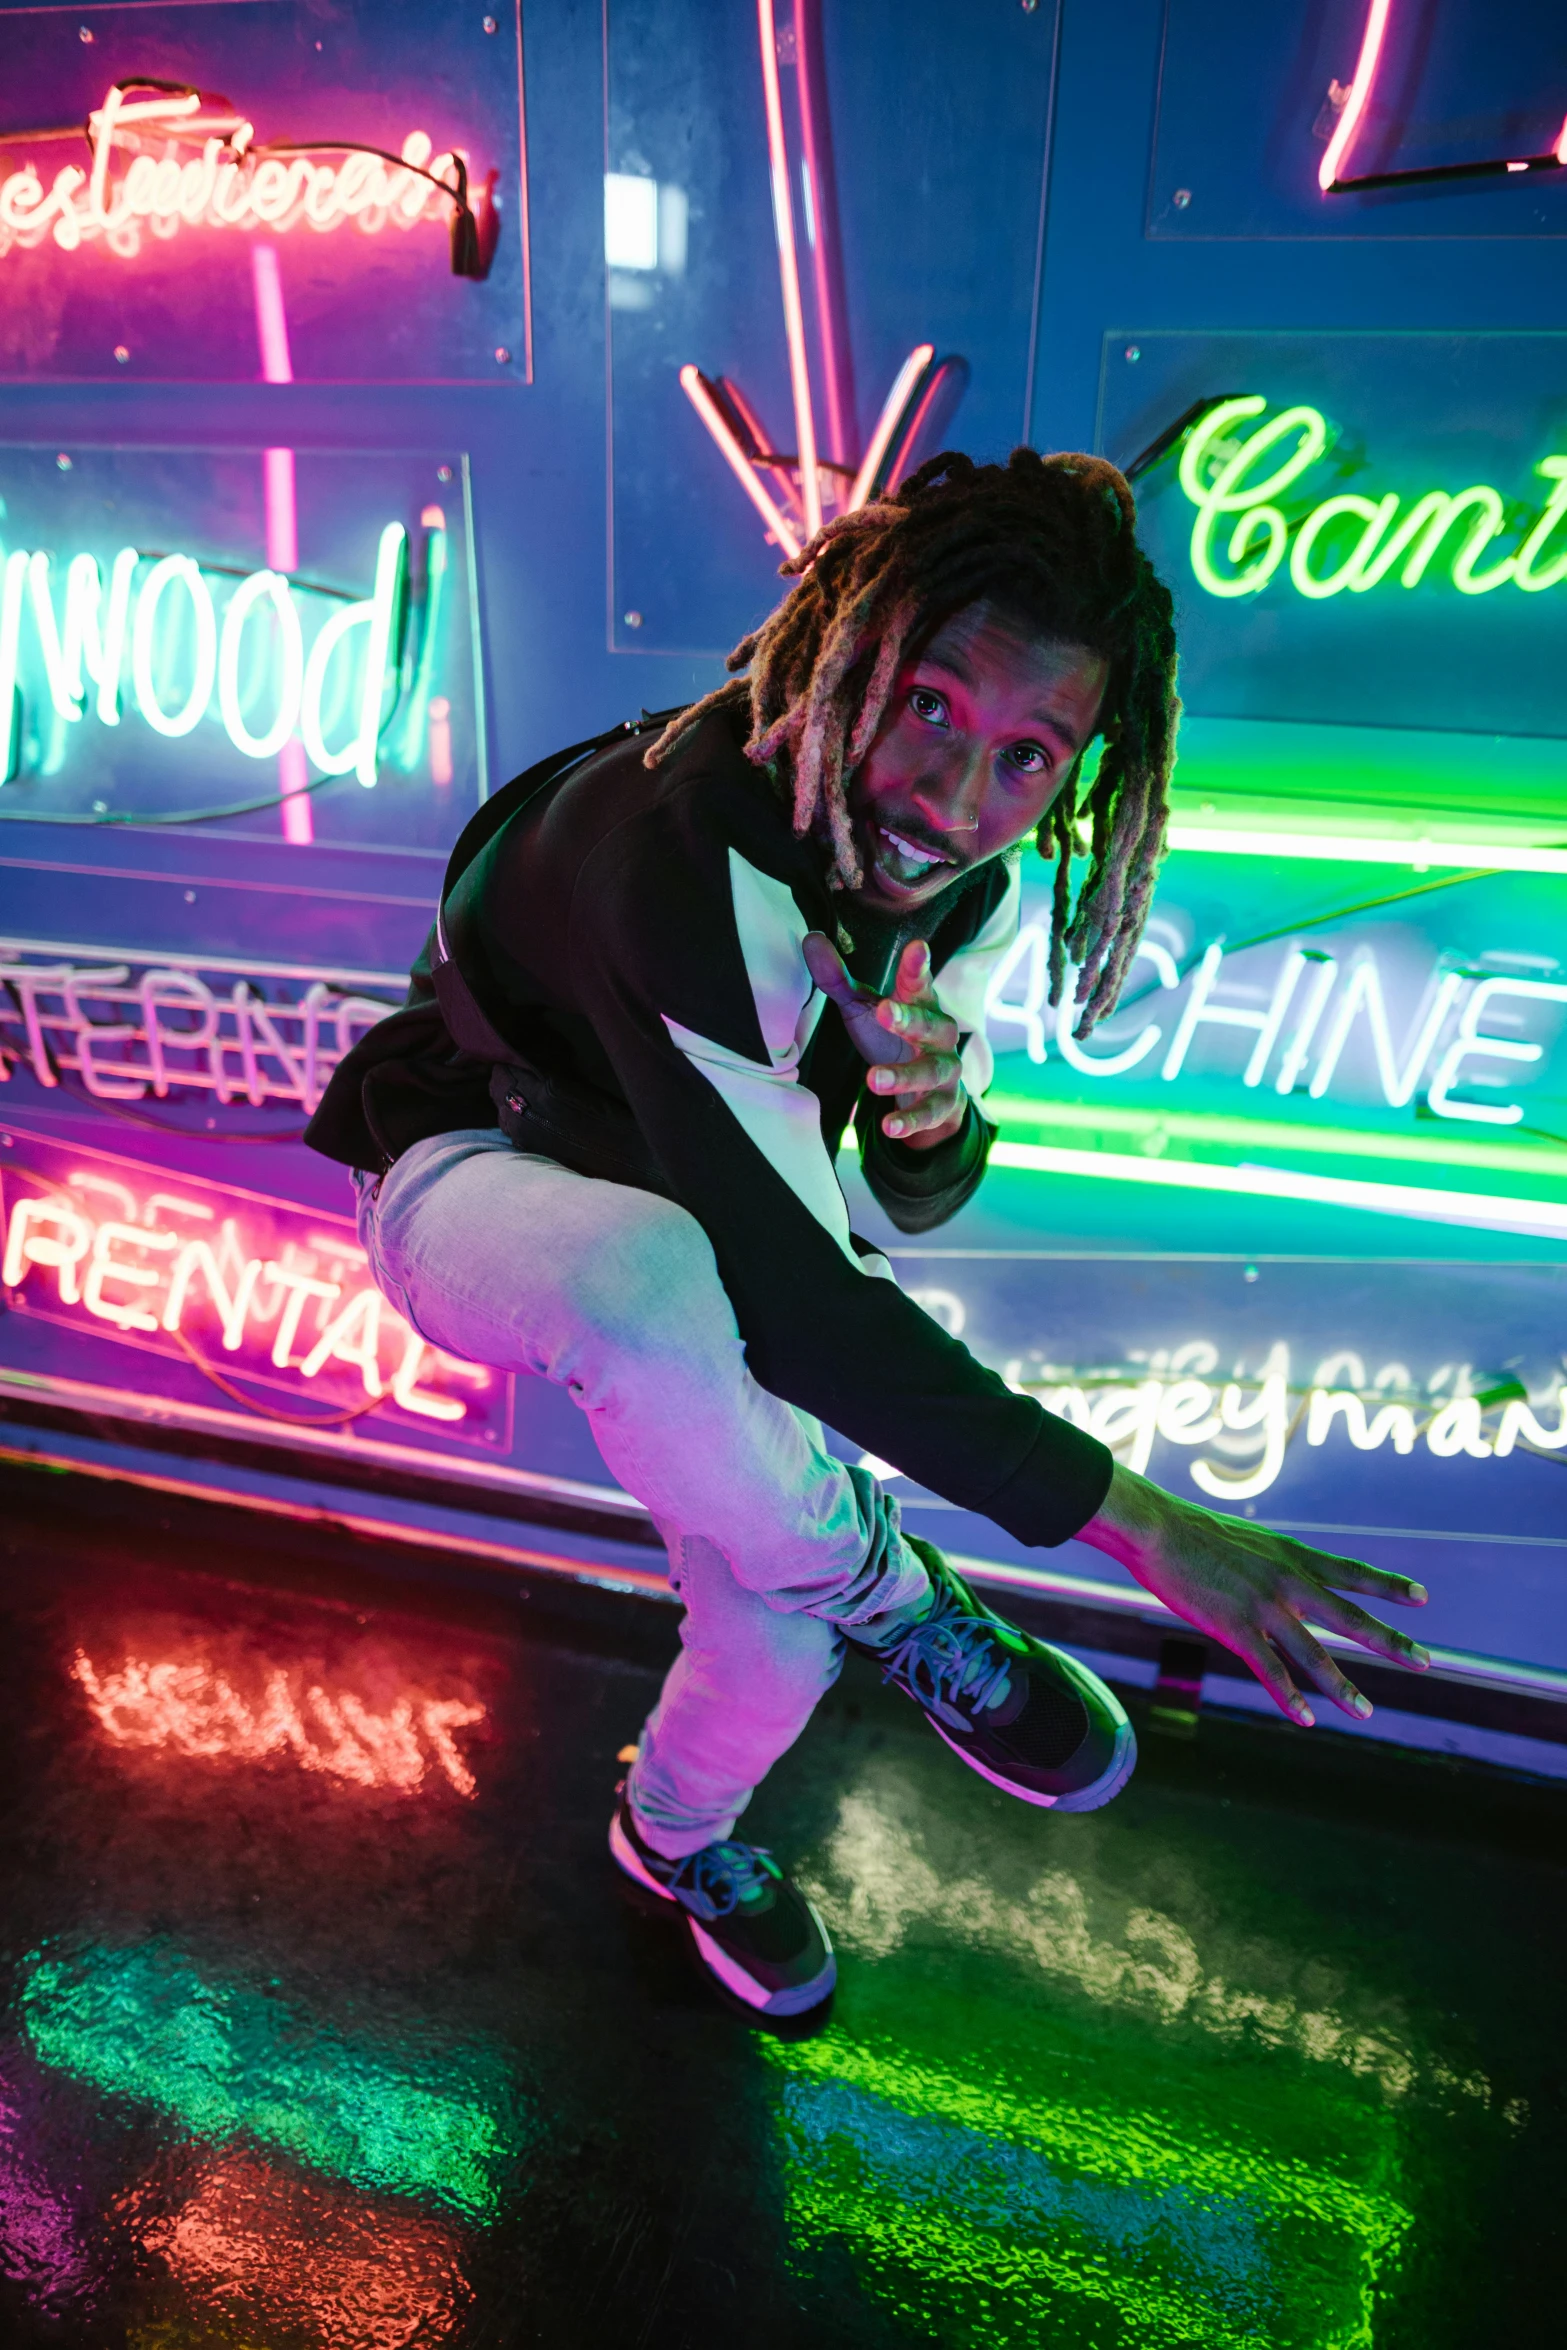 a man on a skateboard in front of neon signs, dreads, wiz khalifa, press photo, doing a sassy pose